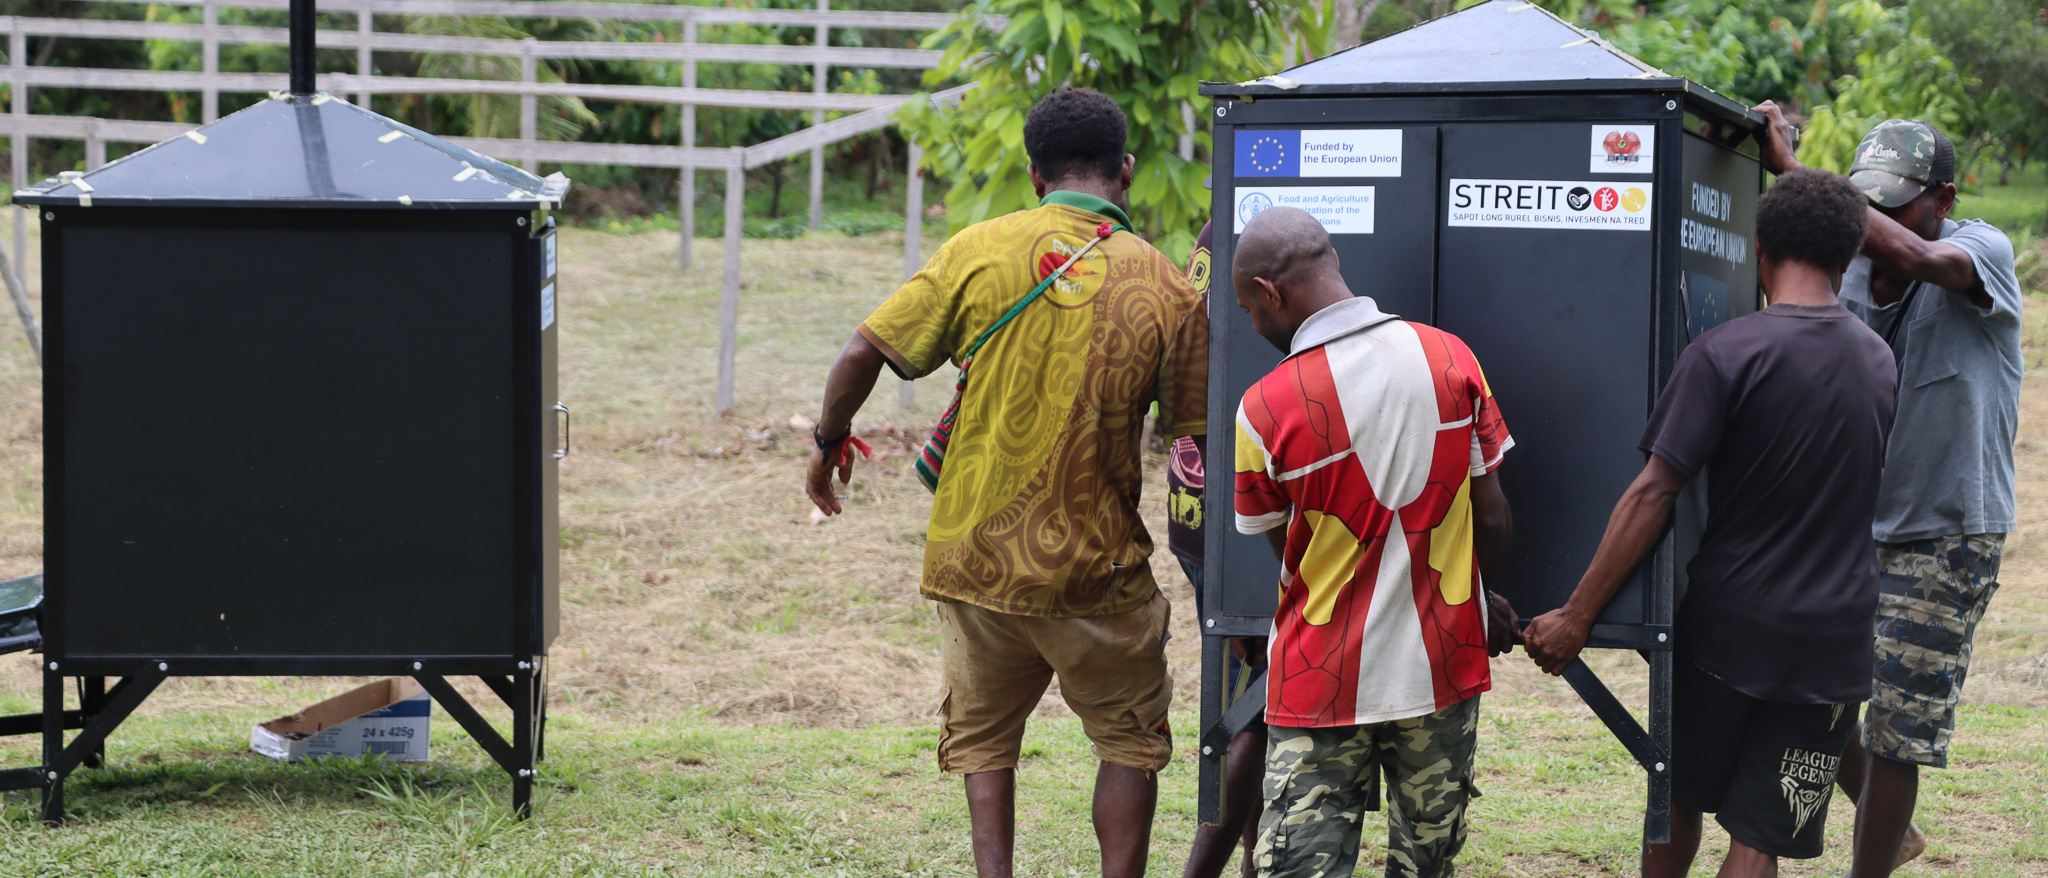 Vanilla farmers from the Sepik region of Papua New Guinea carry a solar dryer provided by the FAO, under the EU-STREIT PNG Programme. ©FAO-STREIT